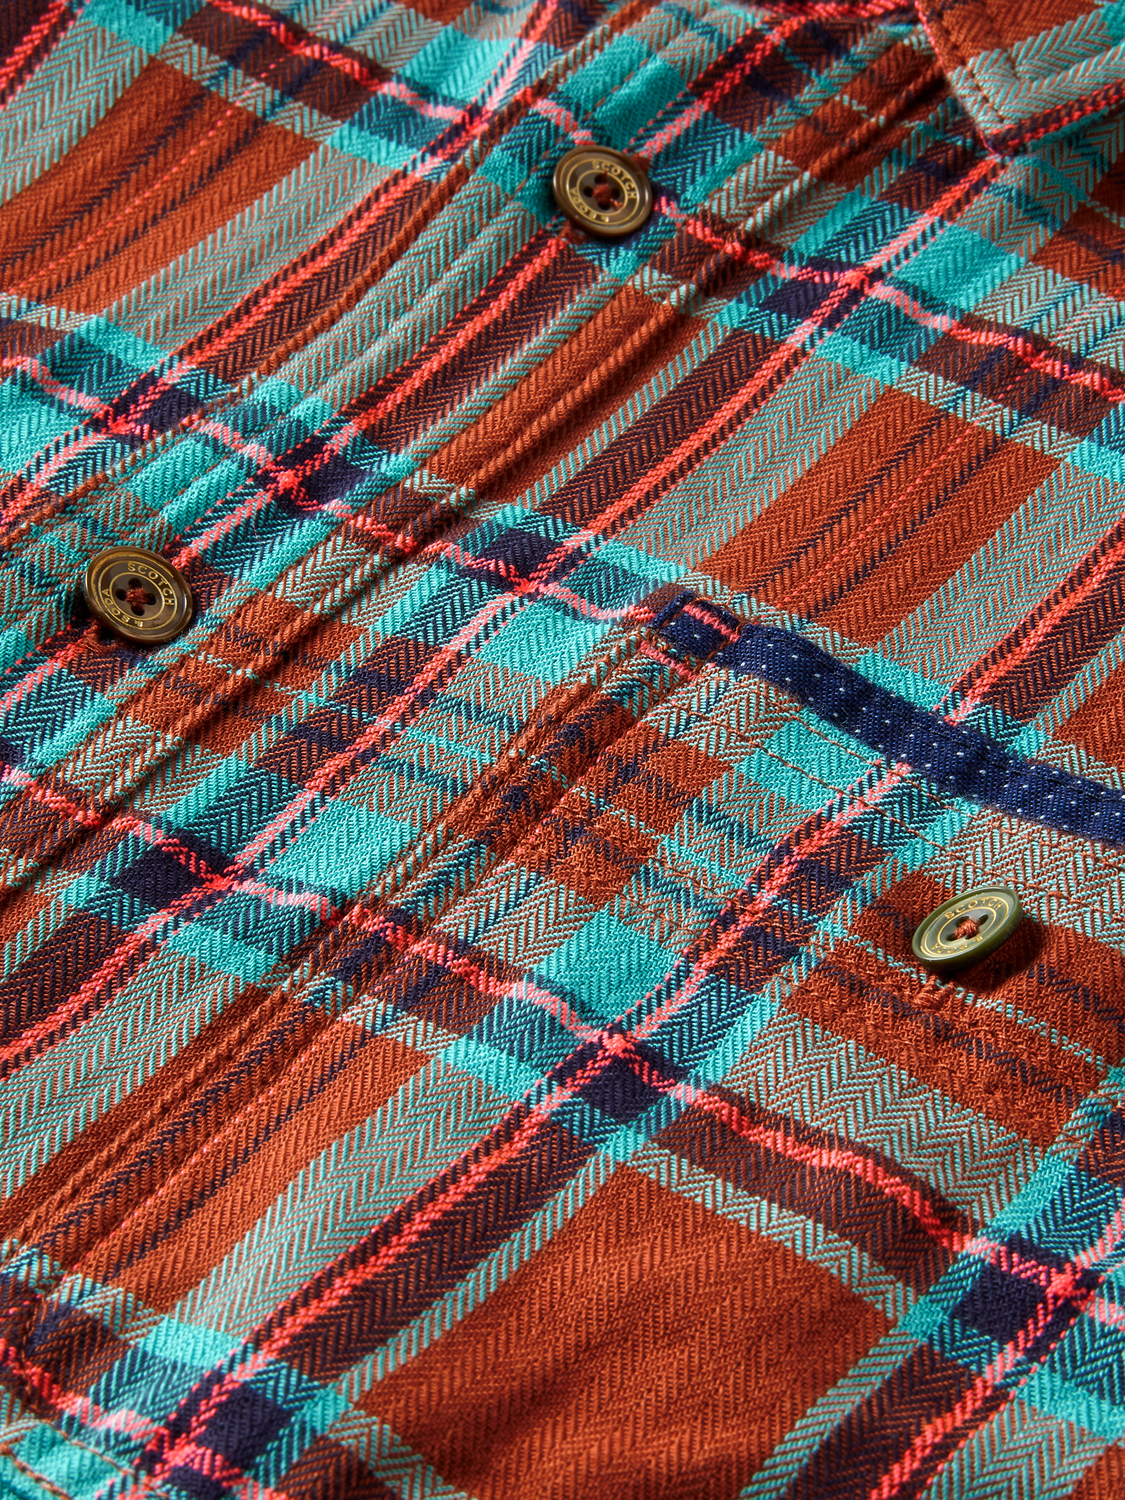 Scotch & Soda - Regular Fit Check Flannel Shirt - Red/Teal